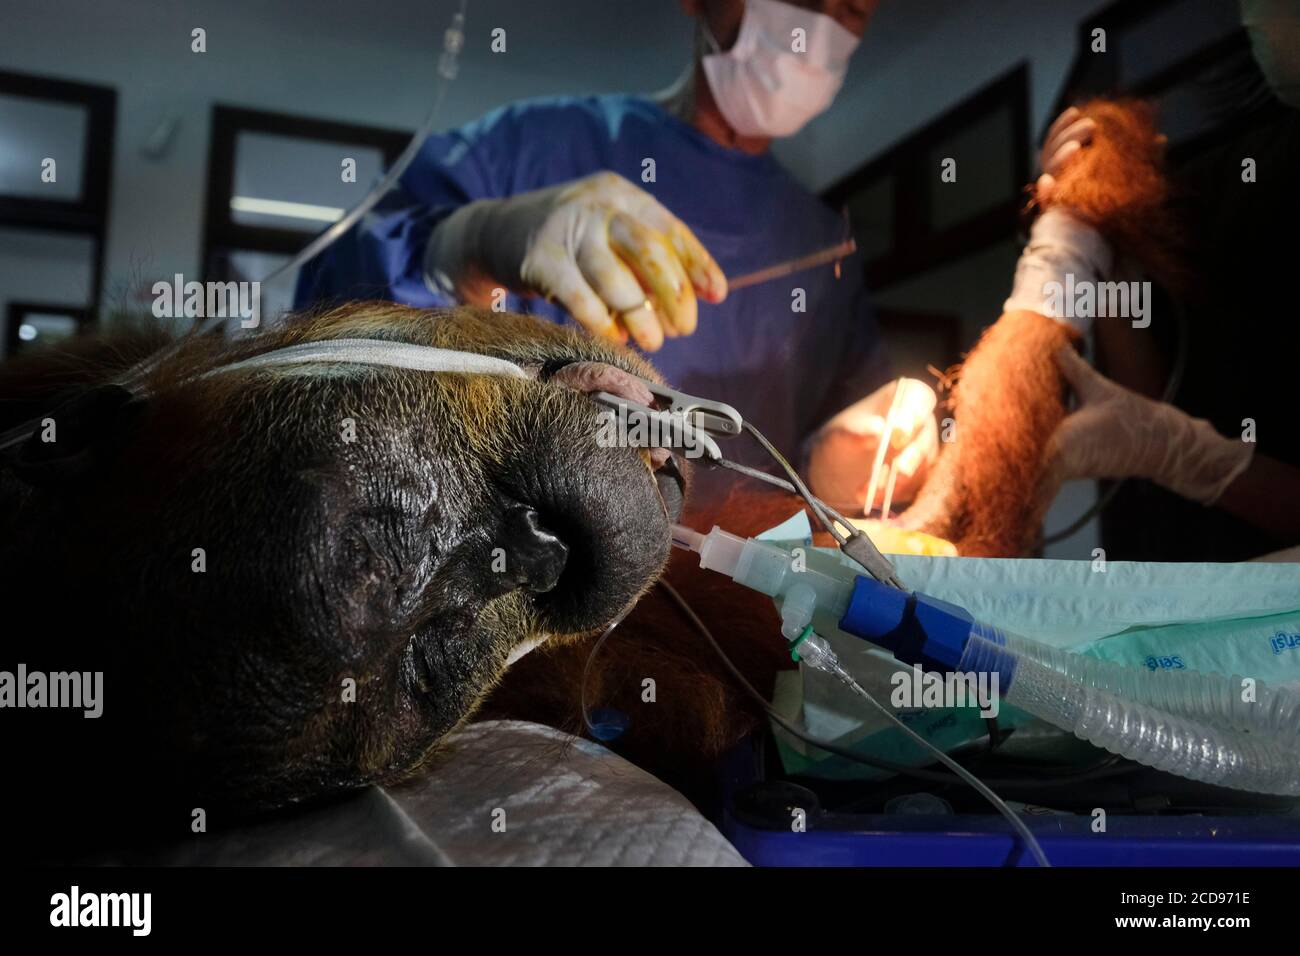 Indonesia, Sumatra, SOCP Quarantine Center, rescuing orangutans in difficulty by Dr. Andreas Messikommer, Swiss surgeon specialized in orthopedic and traumatological surgery, before socialization and reintroduction into their natural environment Stock Photo